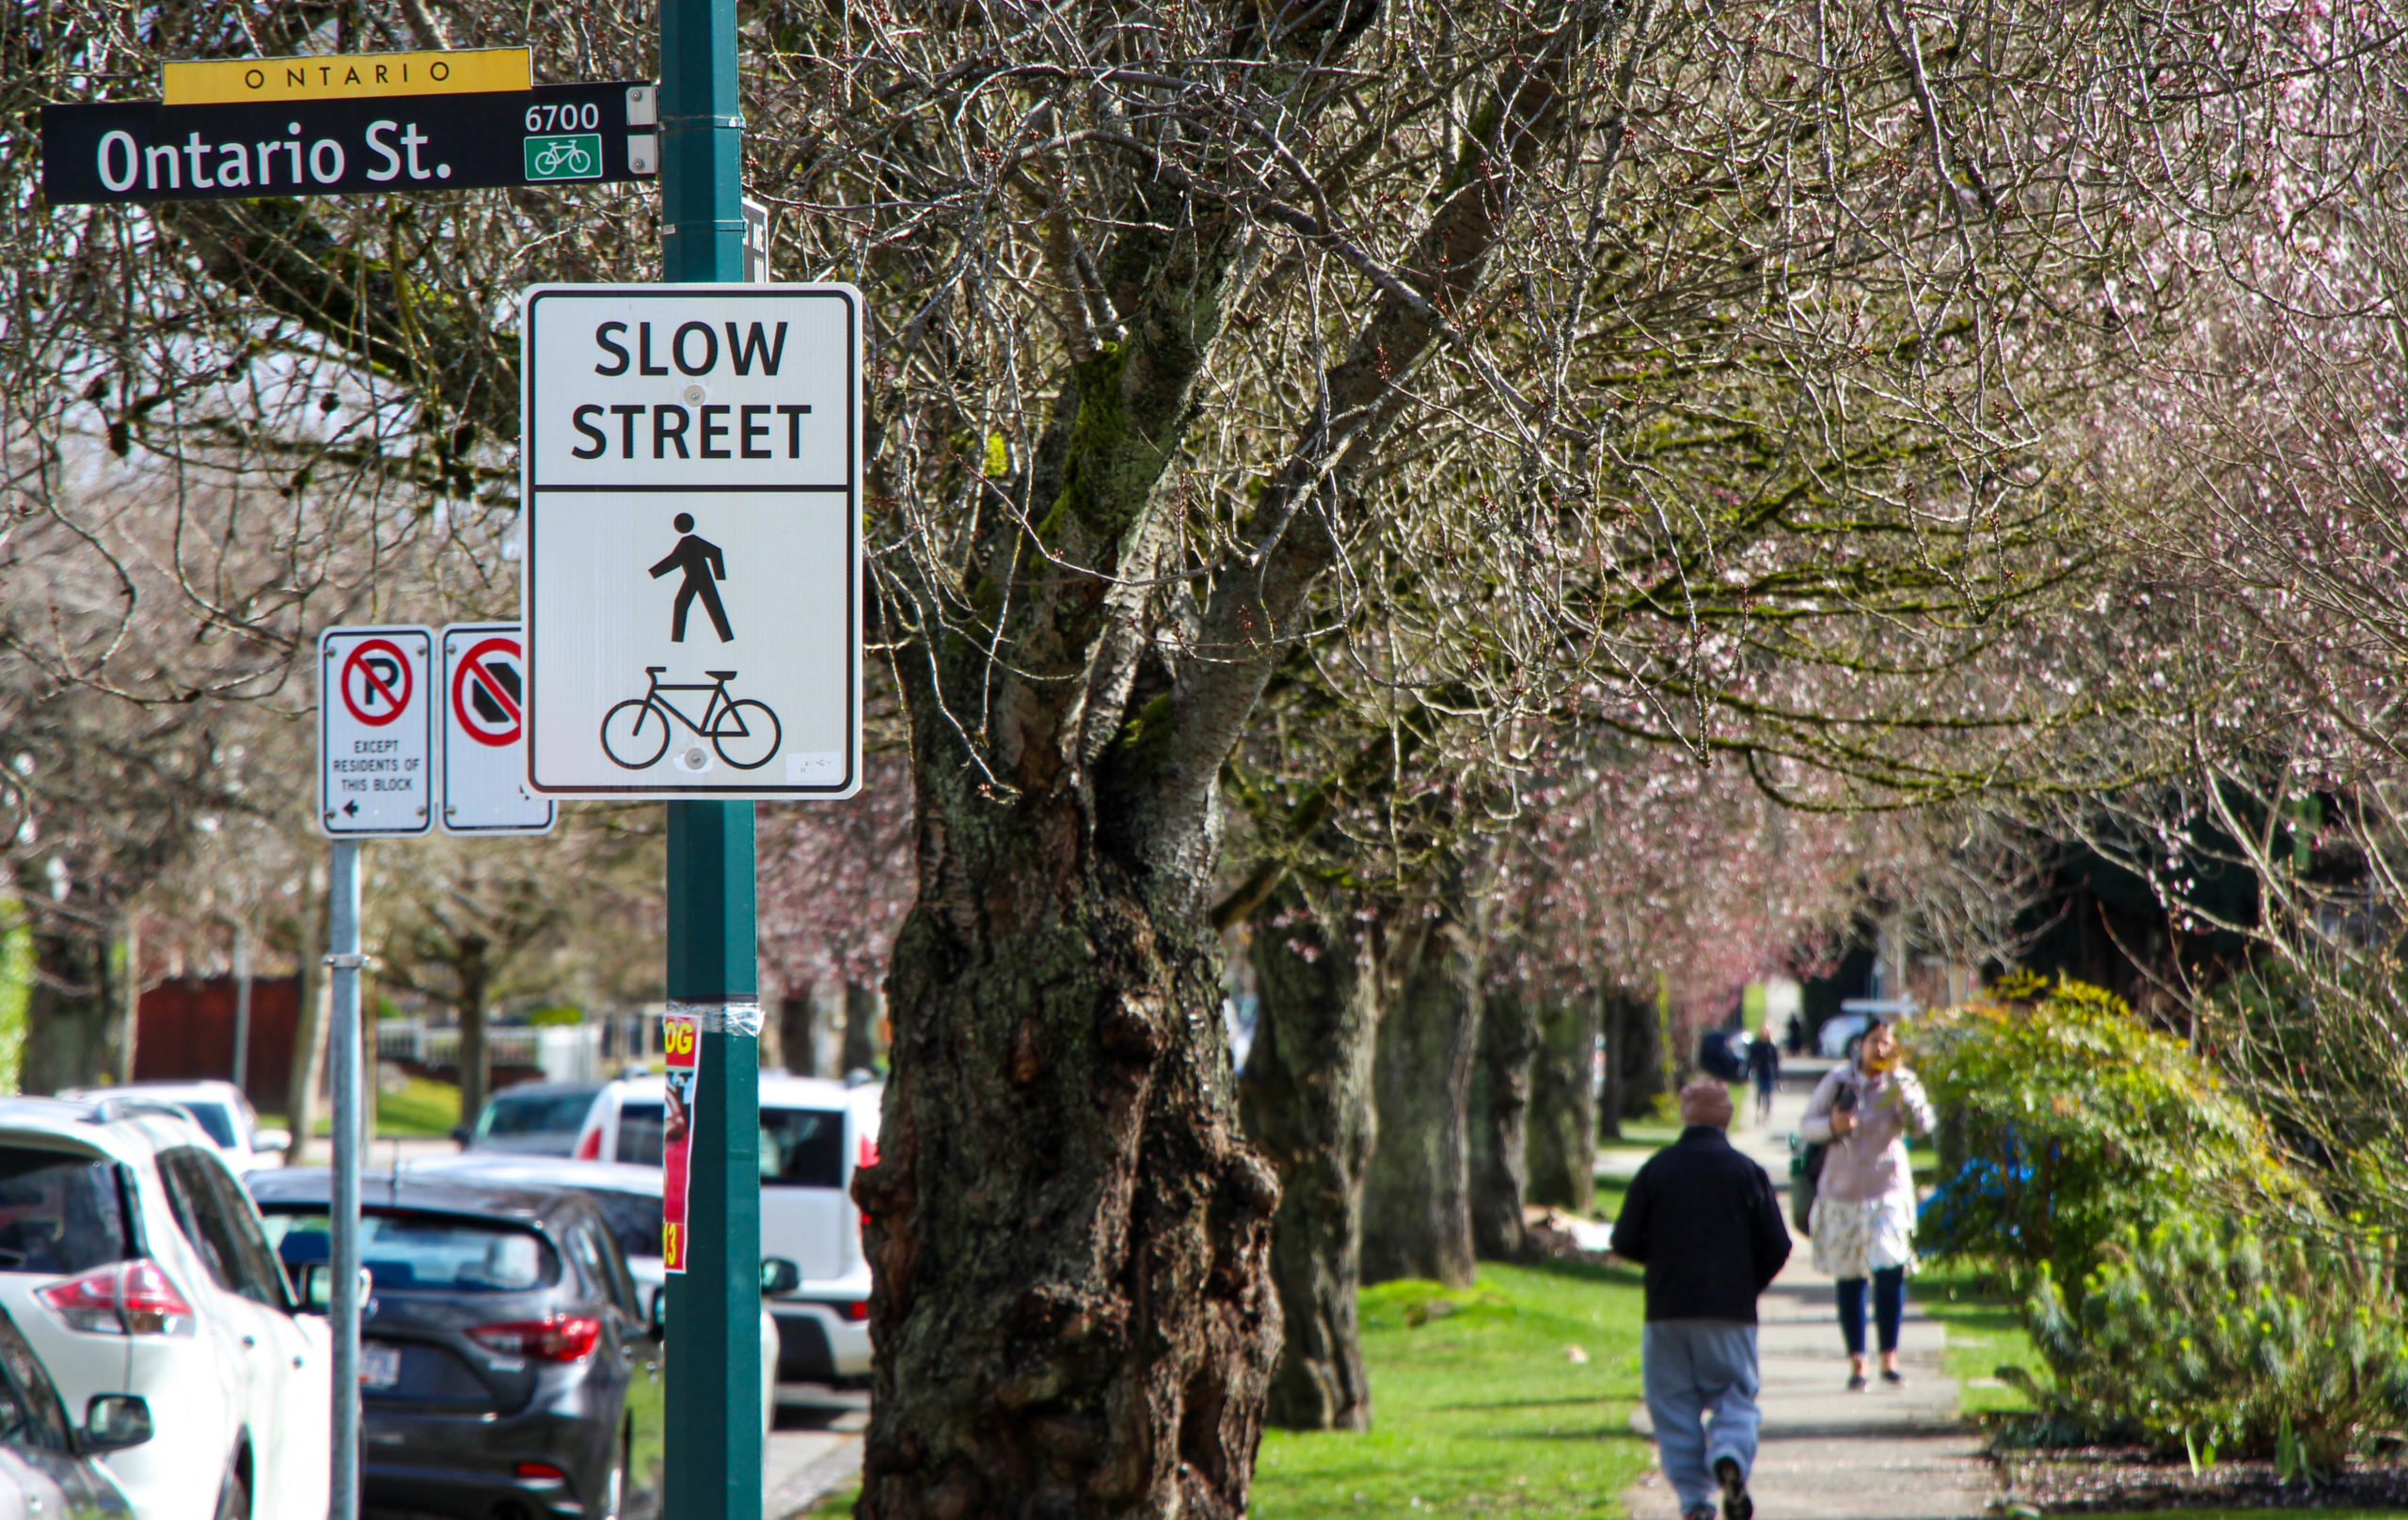 Pedestrians walk on a sidewalk along a Vancouver "slow street" with a sign reading "slow street" to the left. It's a sunny day.